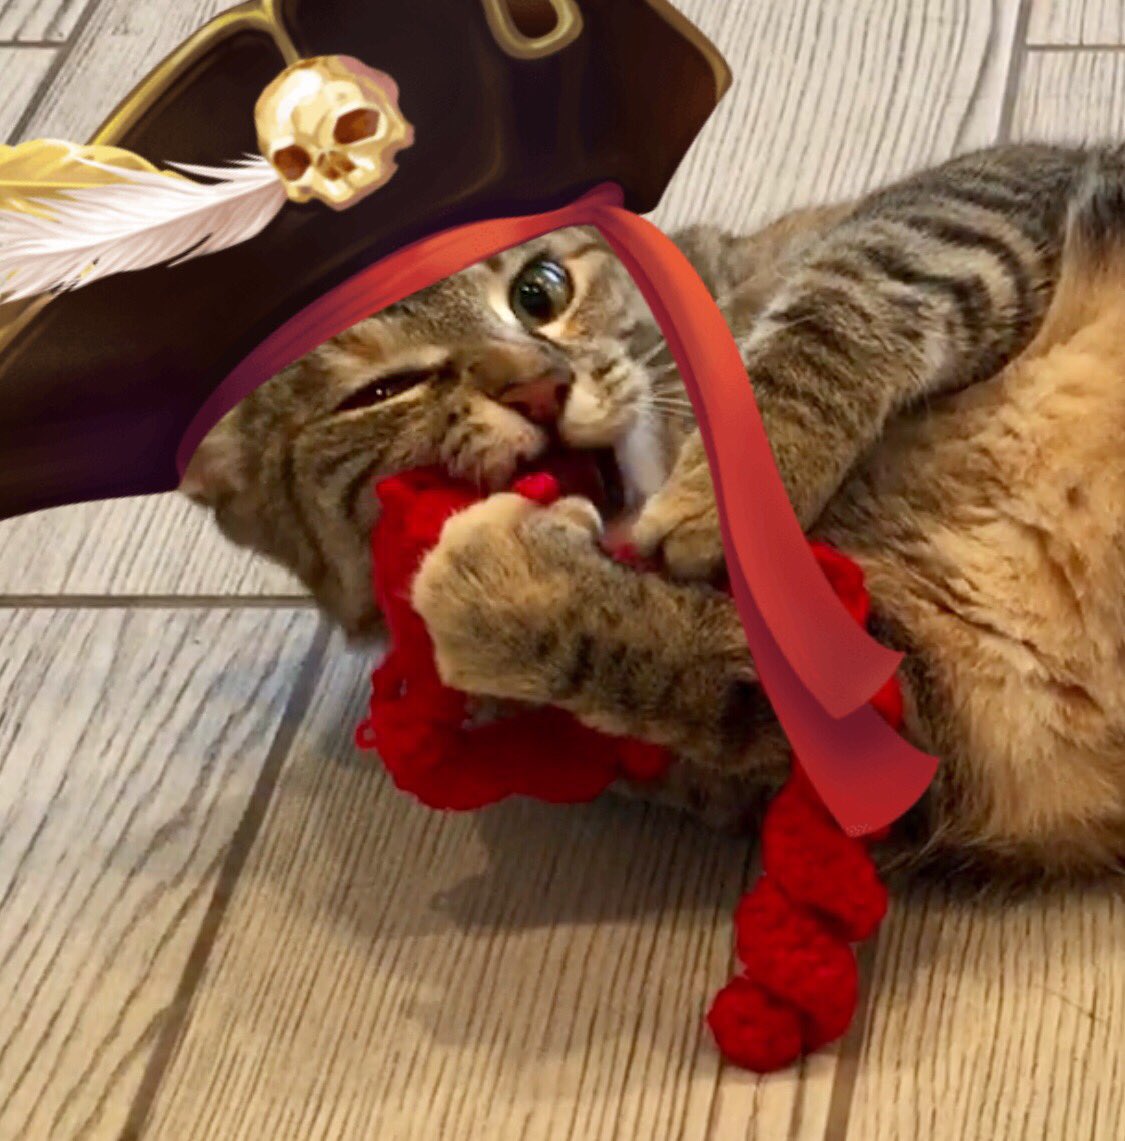 @FartyCheddarCat An ode to our friend Cheddy’s #CheddarPoetry 

I a pirate
I bites da snake
He be so fierce
Tho he be fake

He walk da plank
Da pirate way 
In da water
For da day

🏴‍☠️ 🐍 #CatPoetry — Hazel